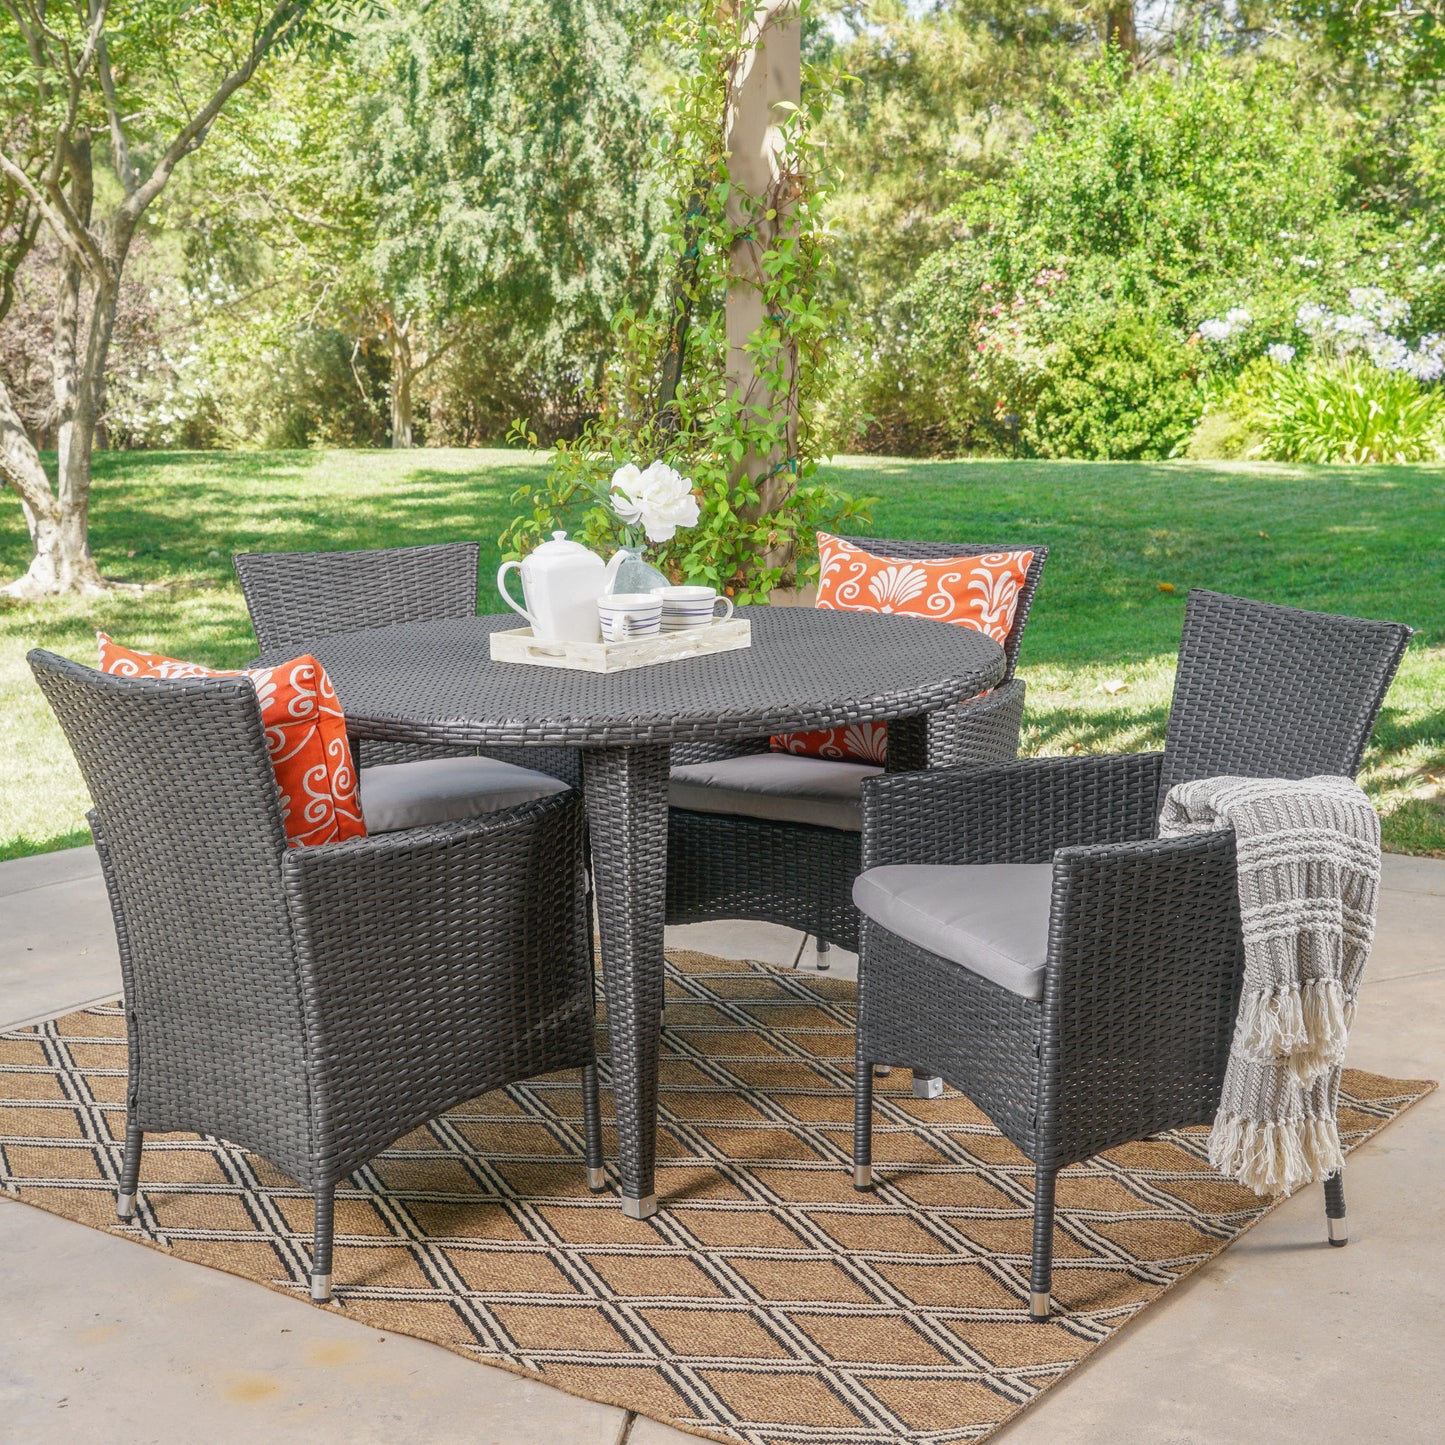 Portia Outdoor 5 Pc Wicker Round Dining Set w/ Water Resistant Cushions